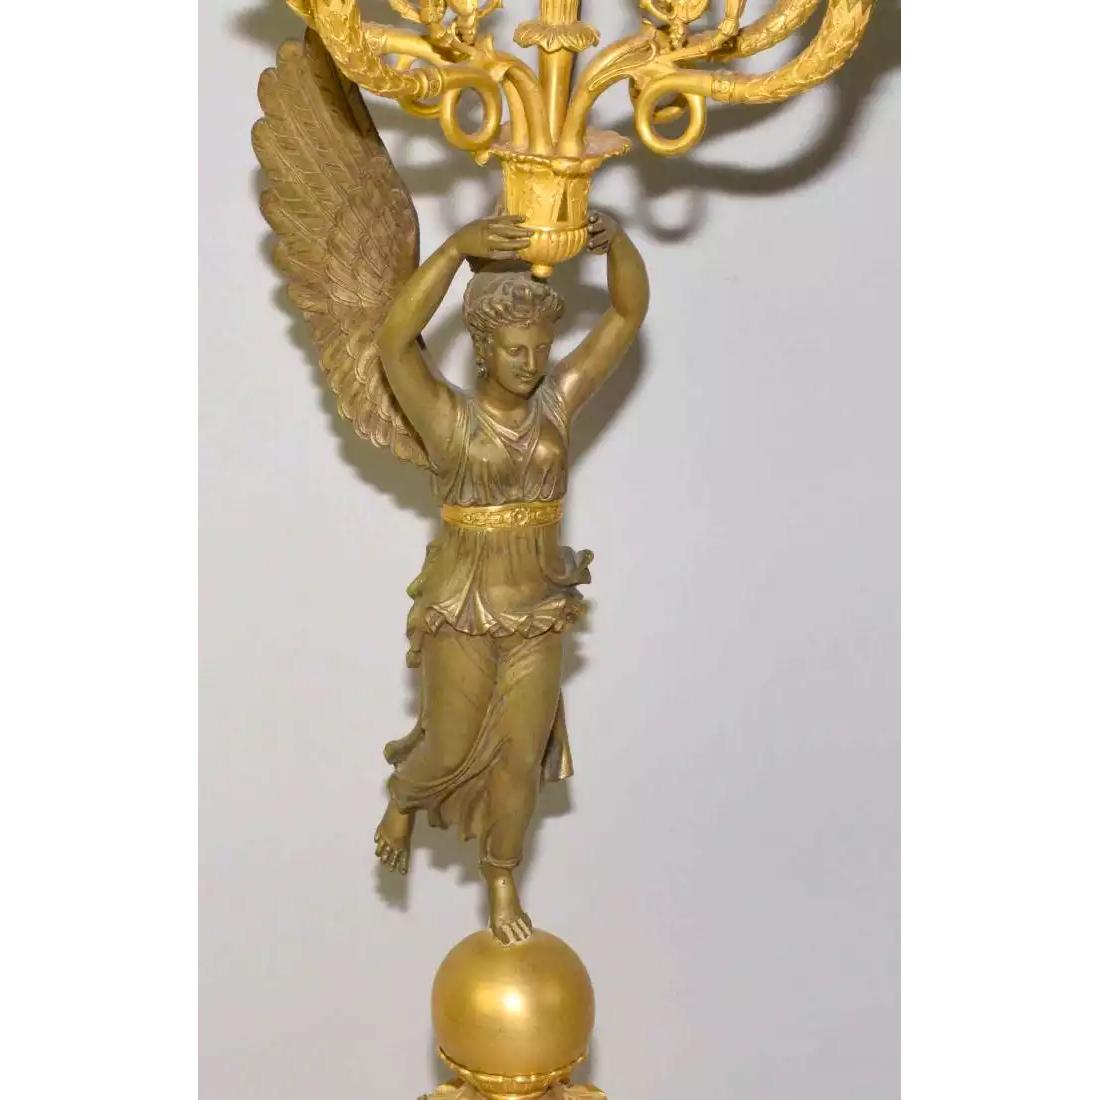 Each winged figure of classical draped women with her foot upon a polished orb.

Origin: French
Date: Circa 1870
Dimension: 30 3/4 in. x 9 3/4 in.